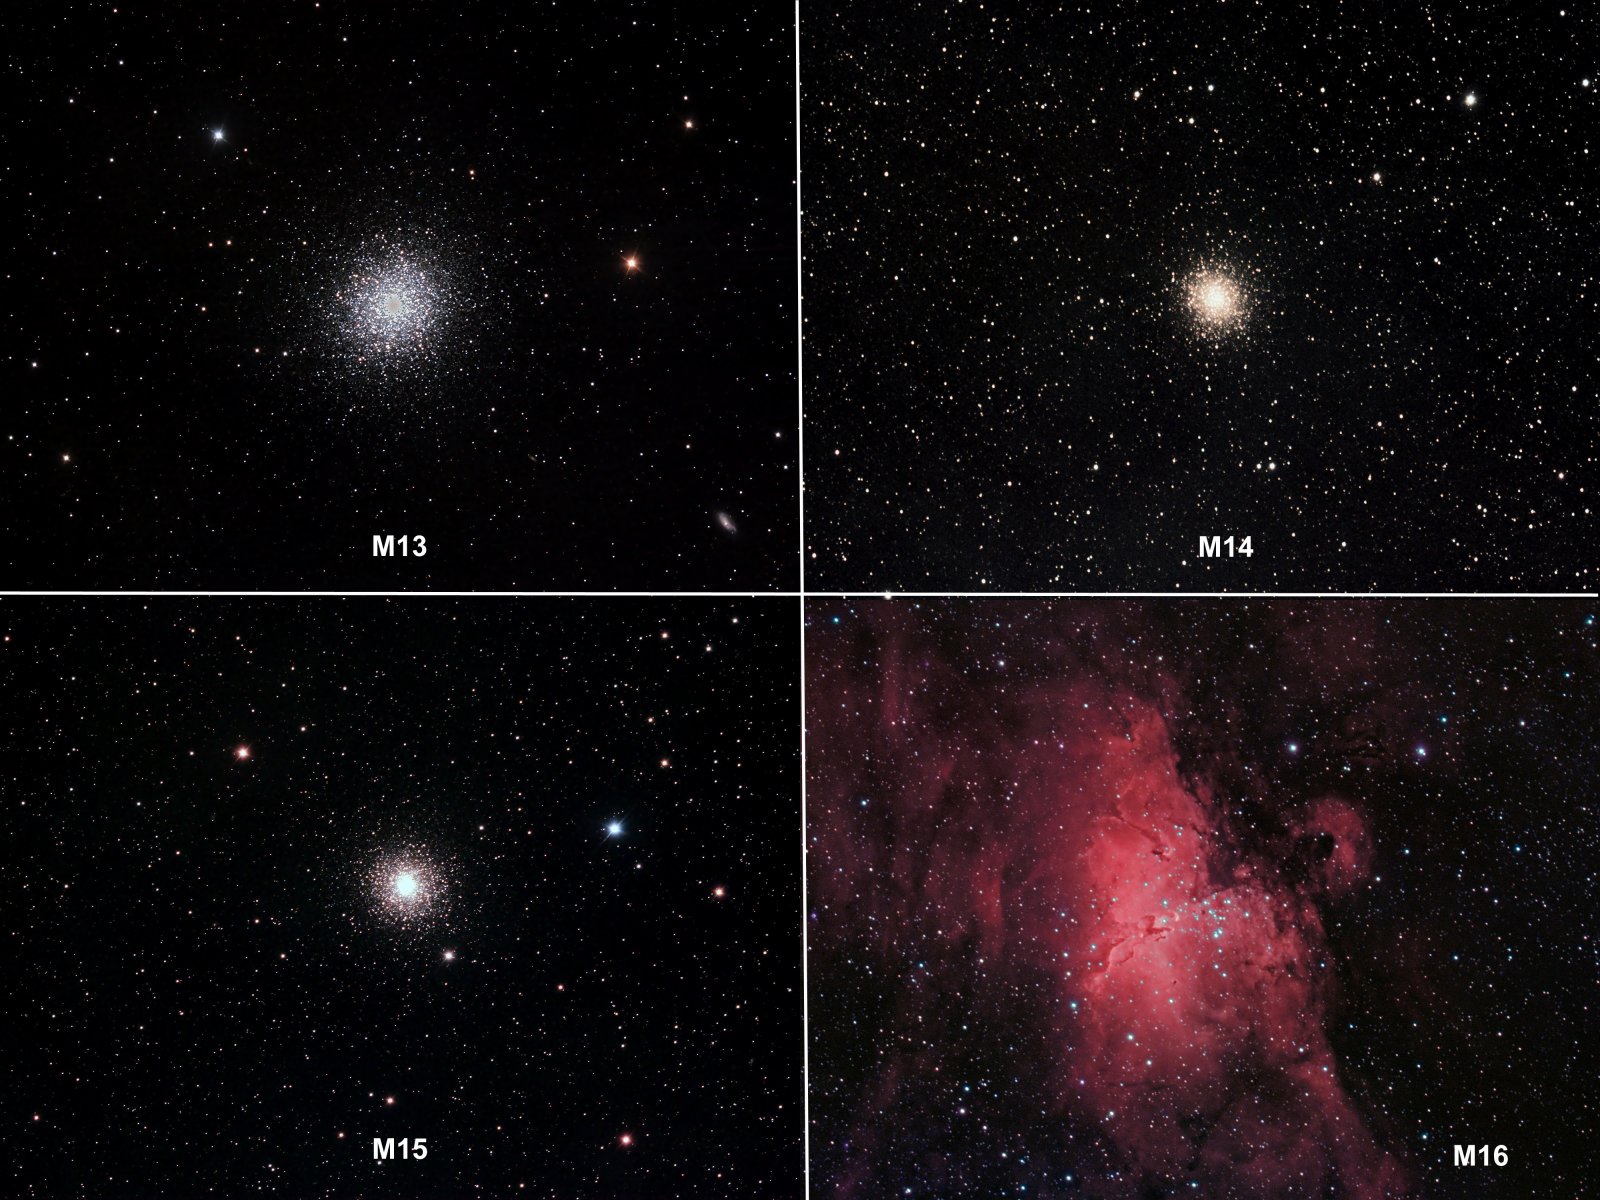 Messiers 13-16